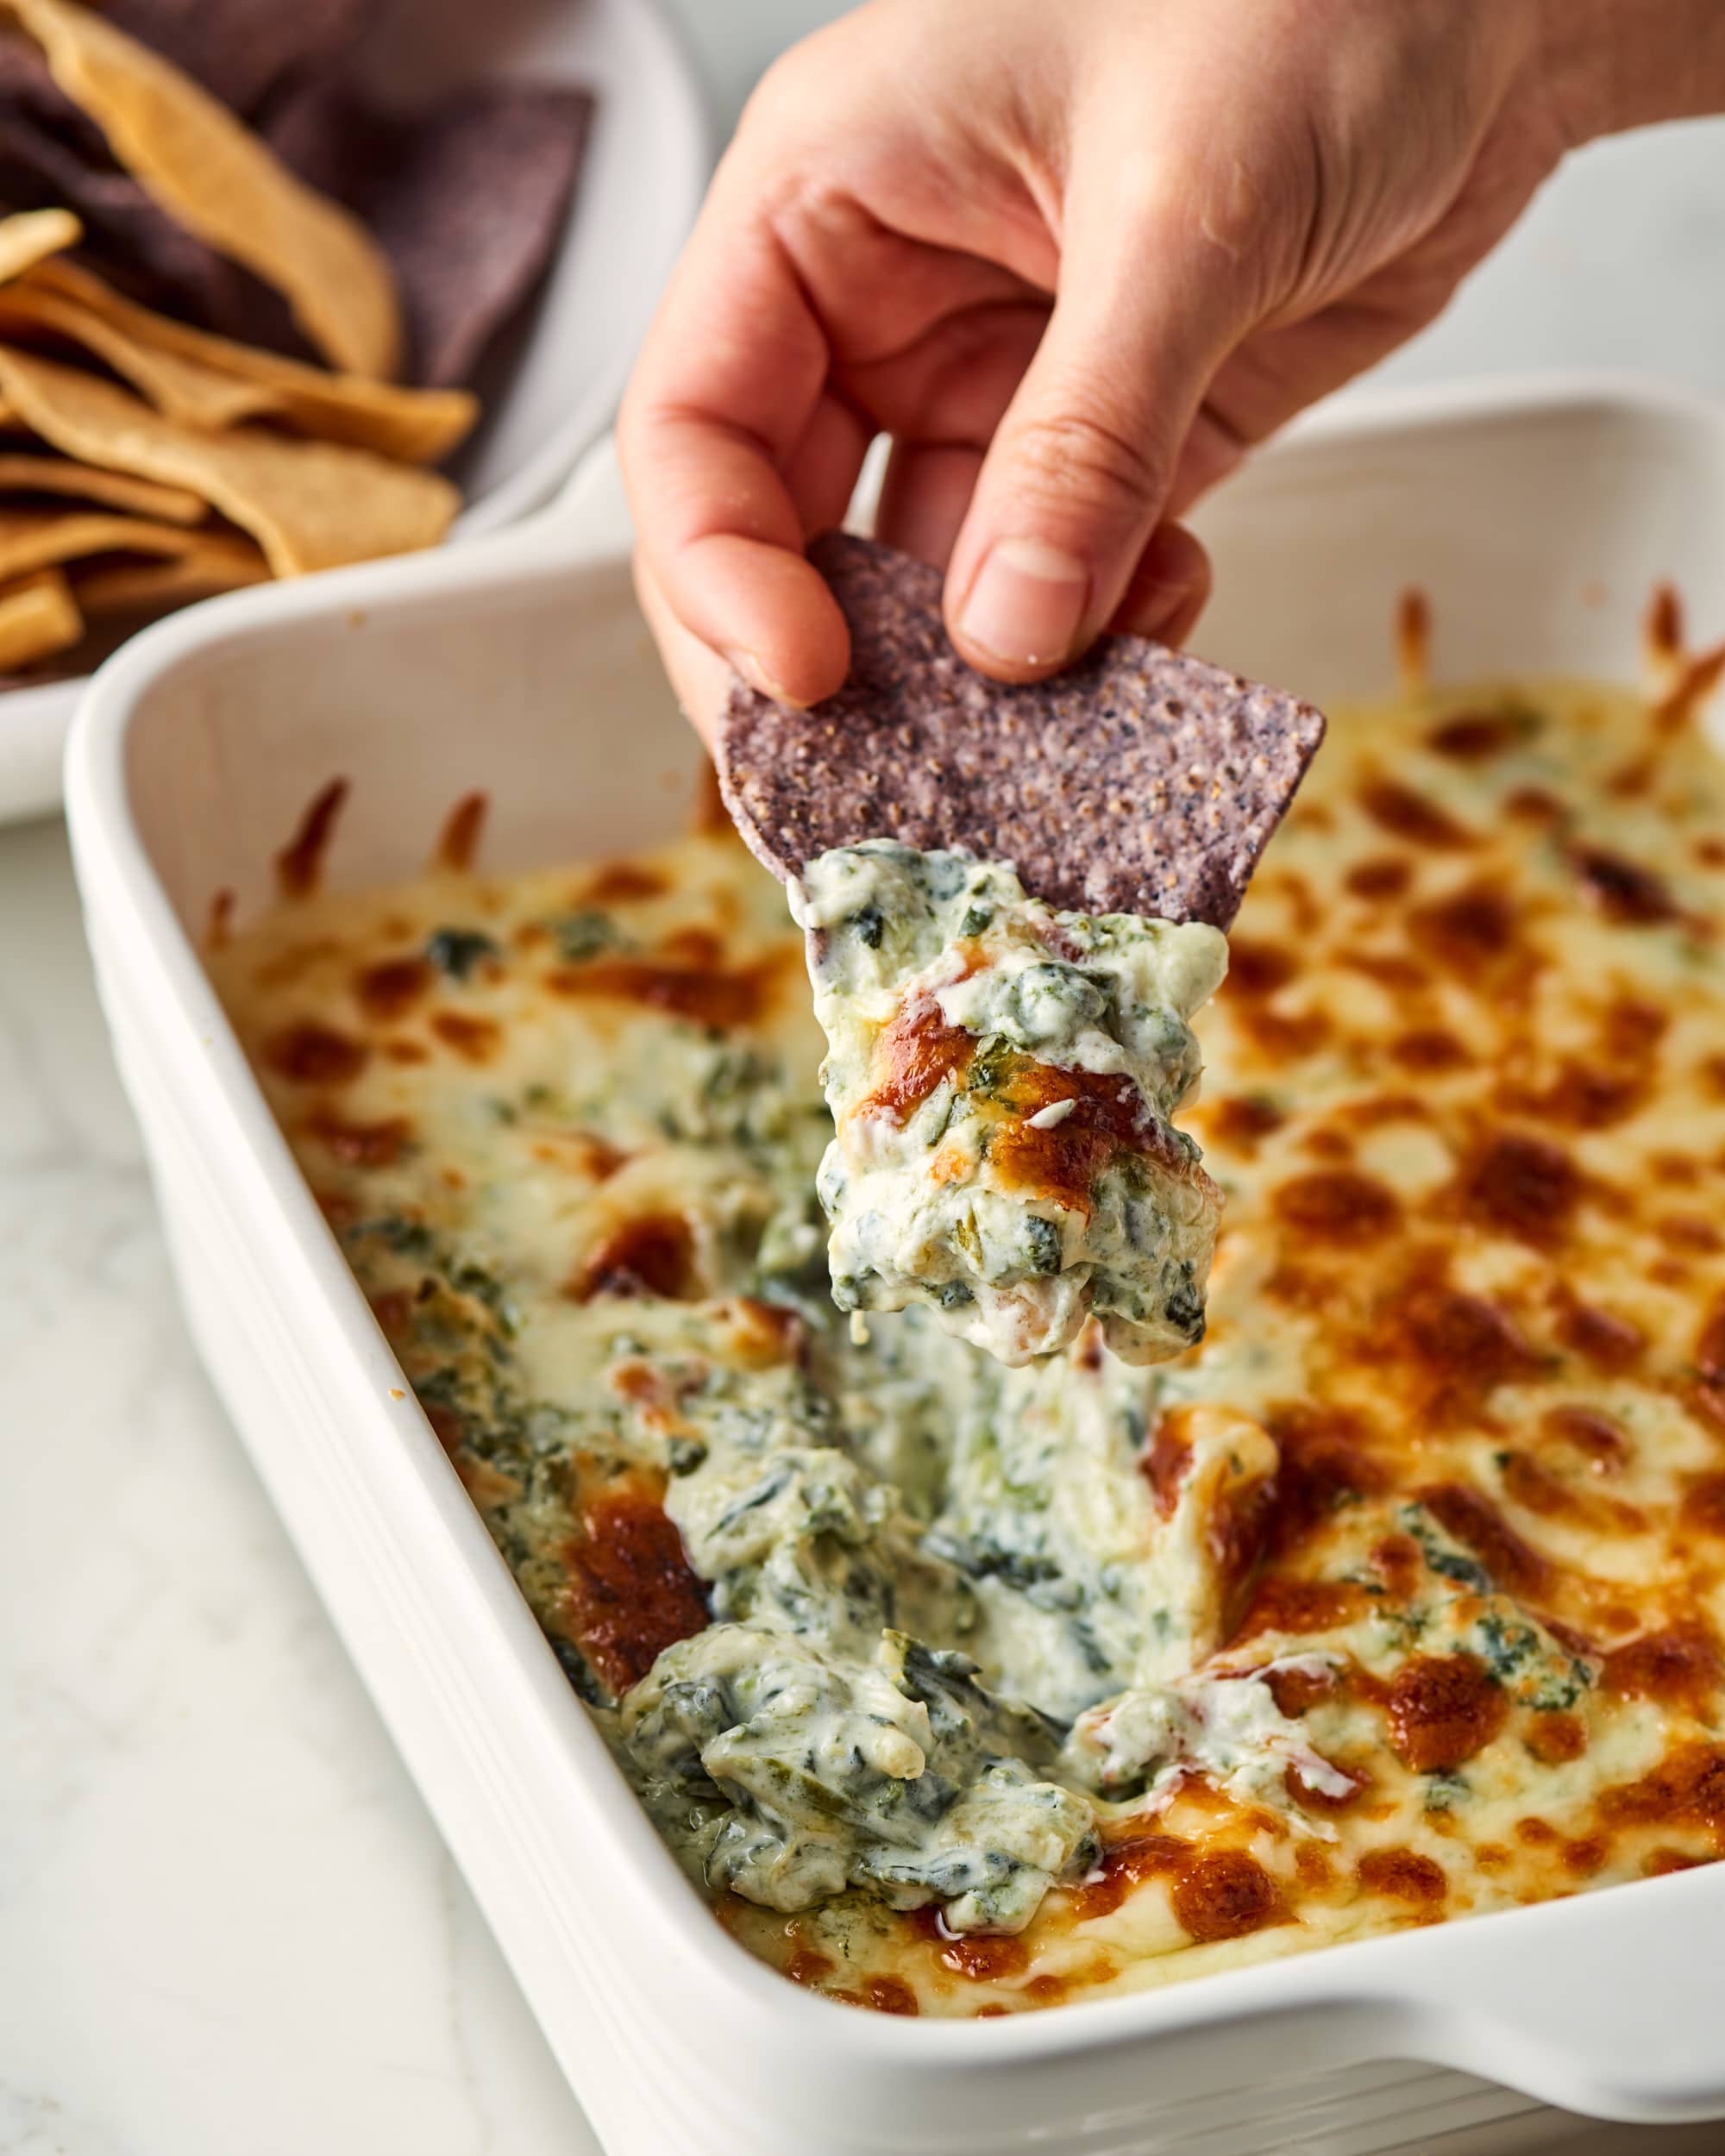 How to Make the Best Spinach Artichoke Dip